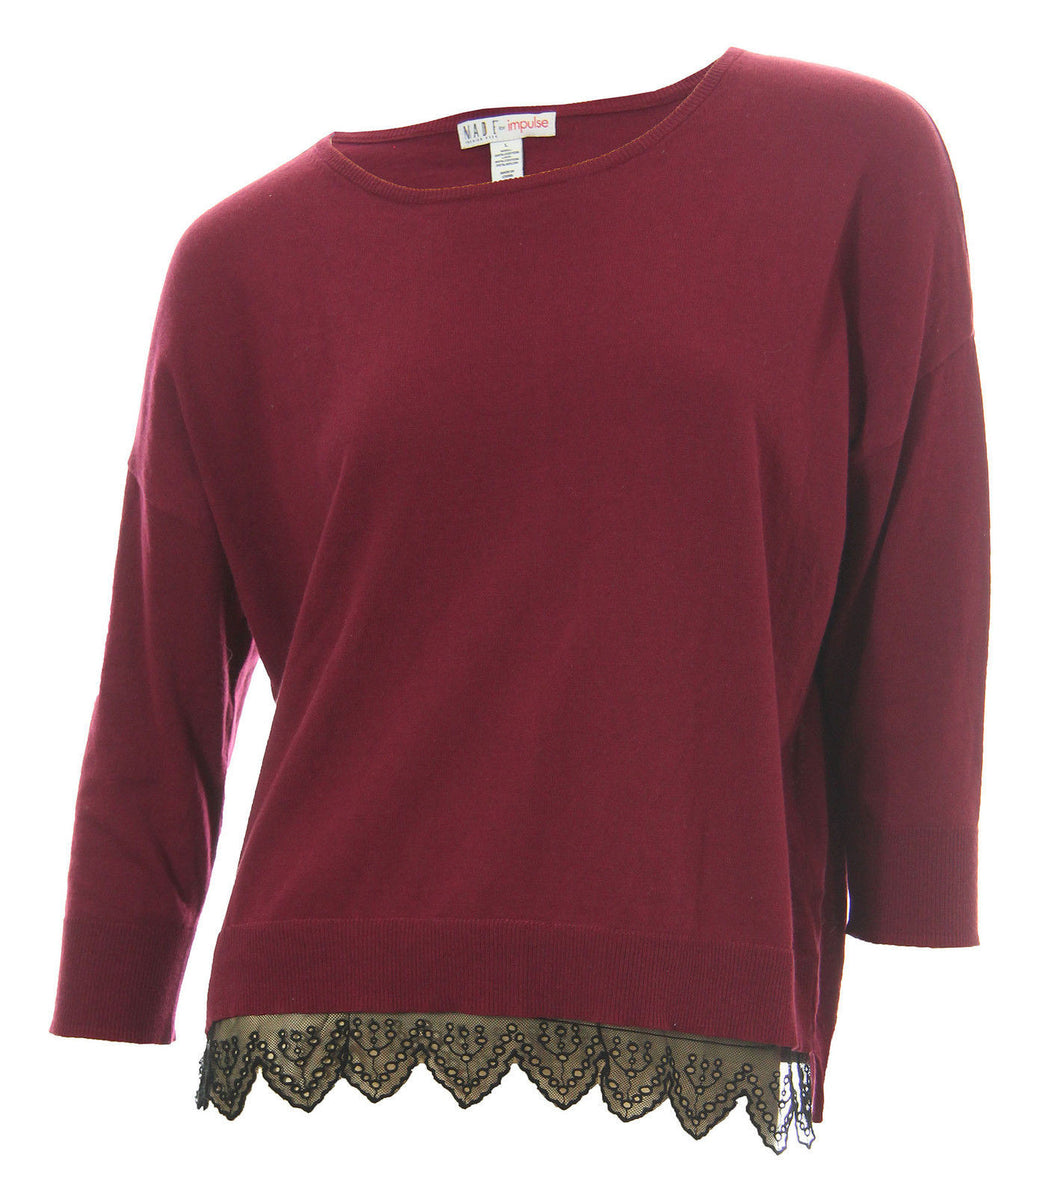 Made for Impulse Burgundy Long Sleeve Black Lace Trim Knit Top